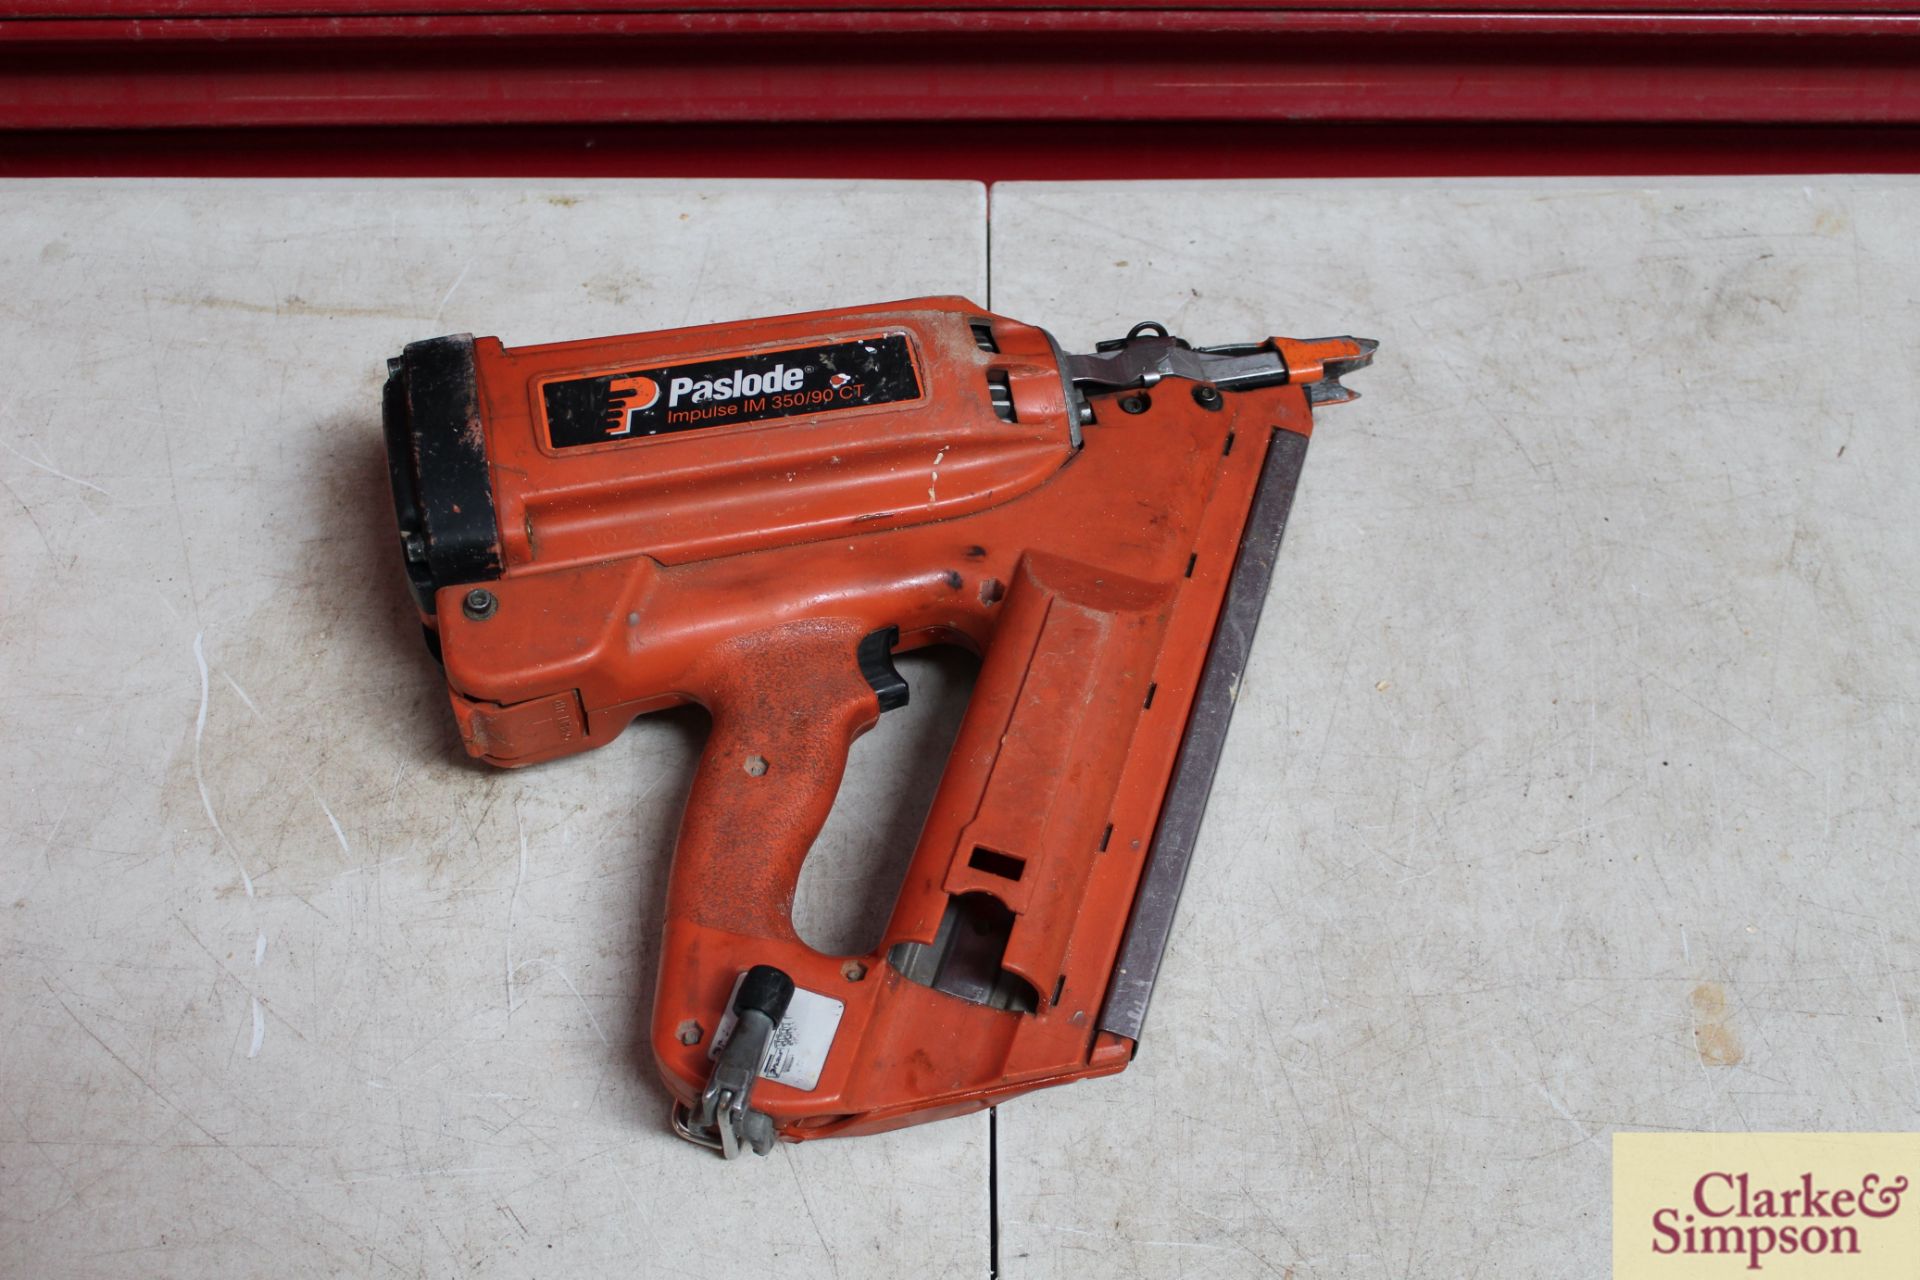 Paslode Impluse IM 350/90 CT nail gun with two batteries and charger in case. - Image 3 of 4